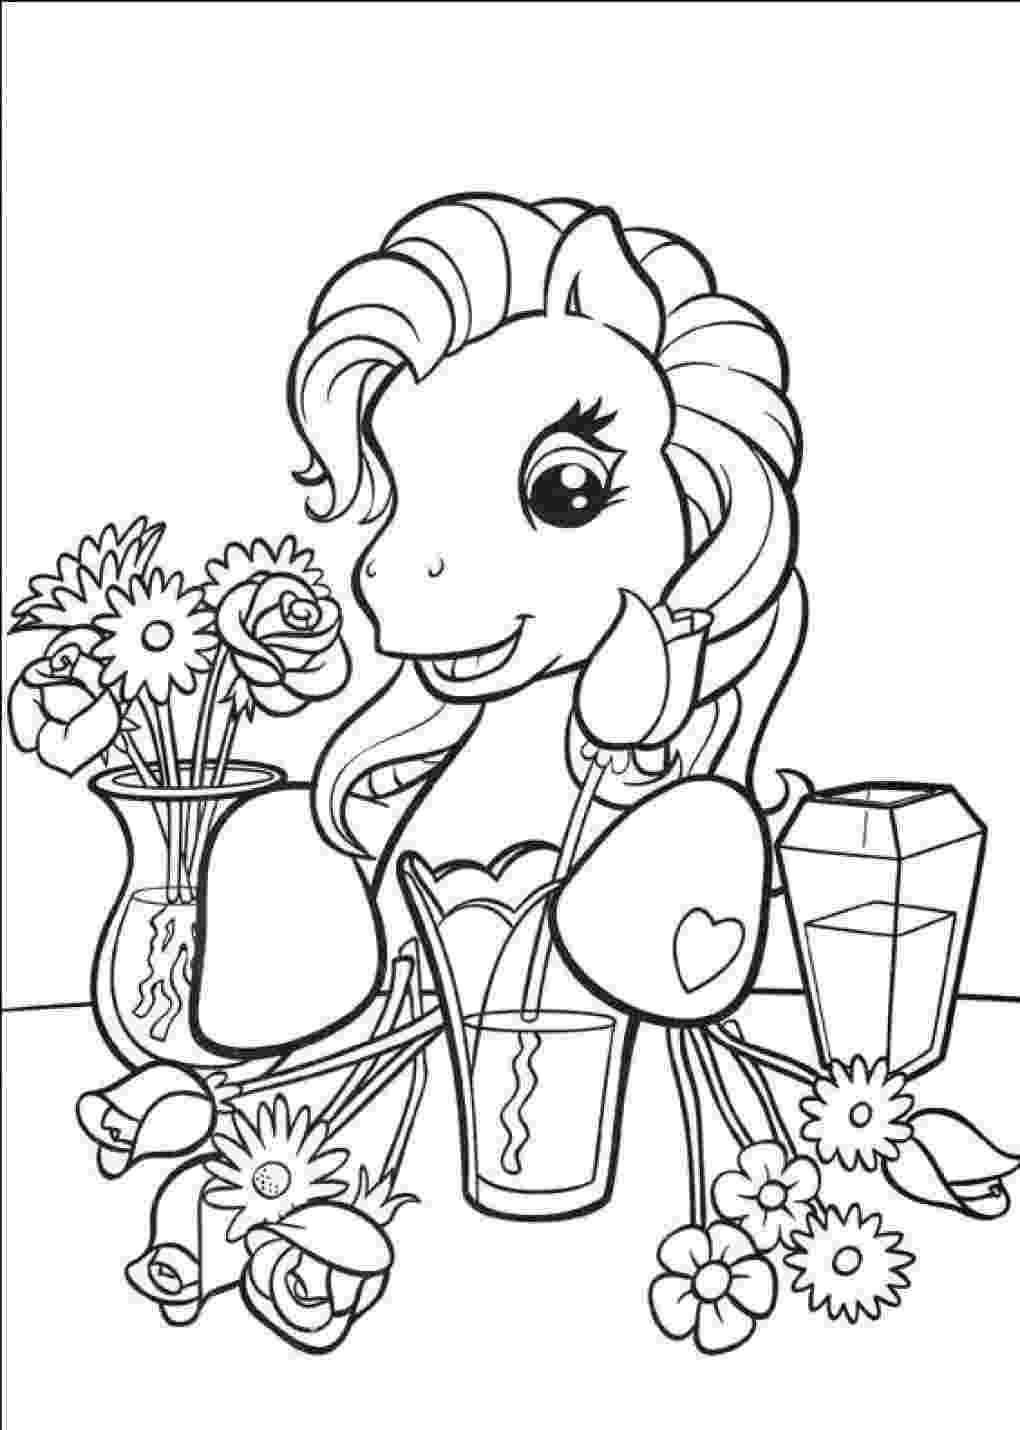 my little pony printables coloring pages top 30 my little pony coloring pages printable little my coloring printables pages pony 